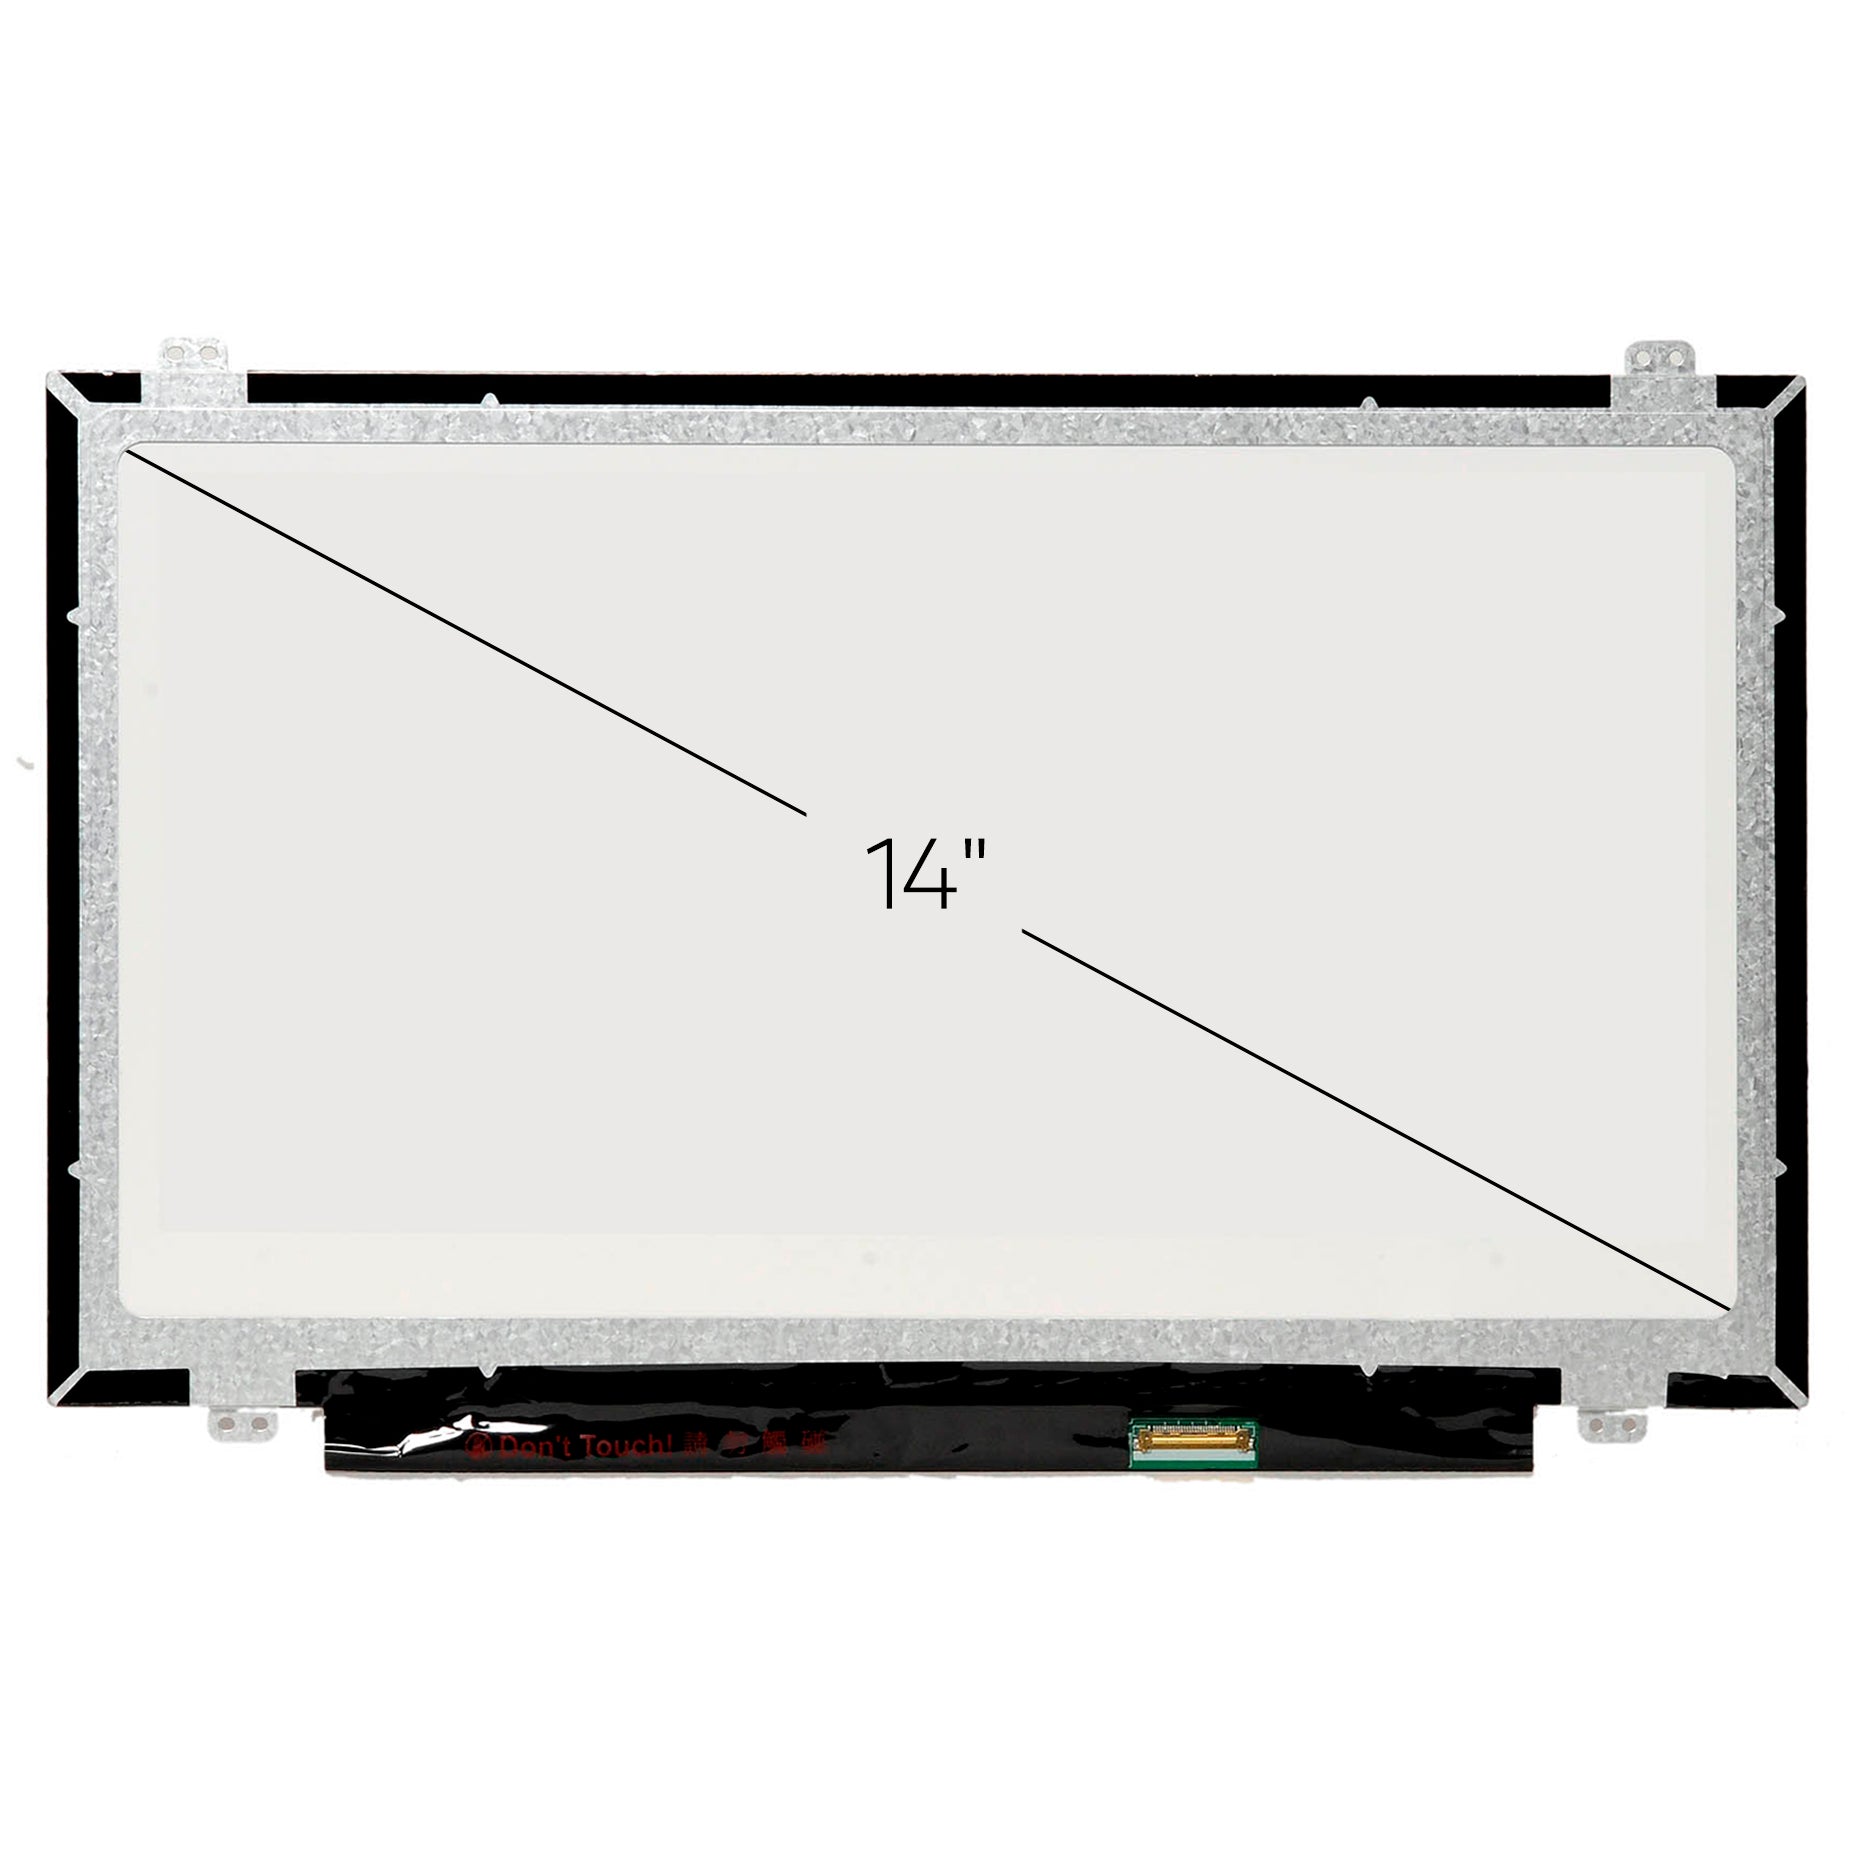 Screen Replacement for HB140WX1-401 V4.0 HD 1366x768 Glossy LCD LED Display